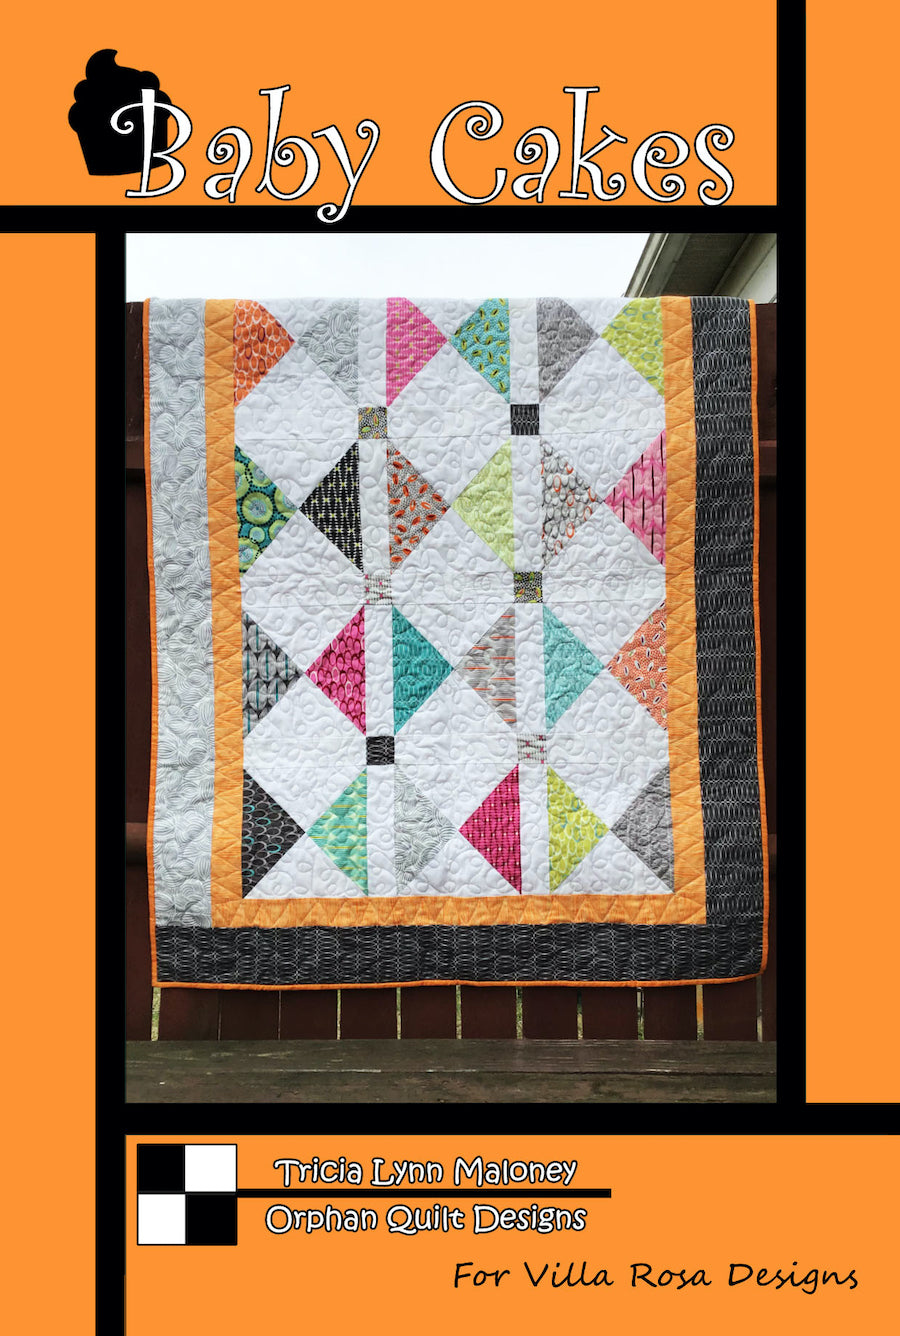 Baby Cakes PDF Quilt Pattern by Villa Rosa Designs